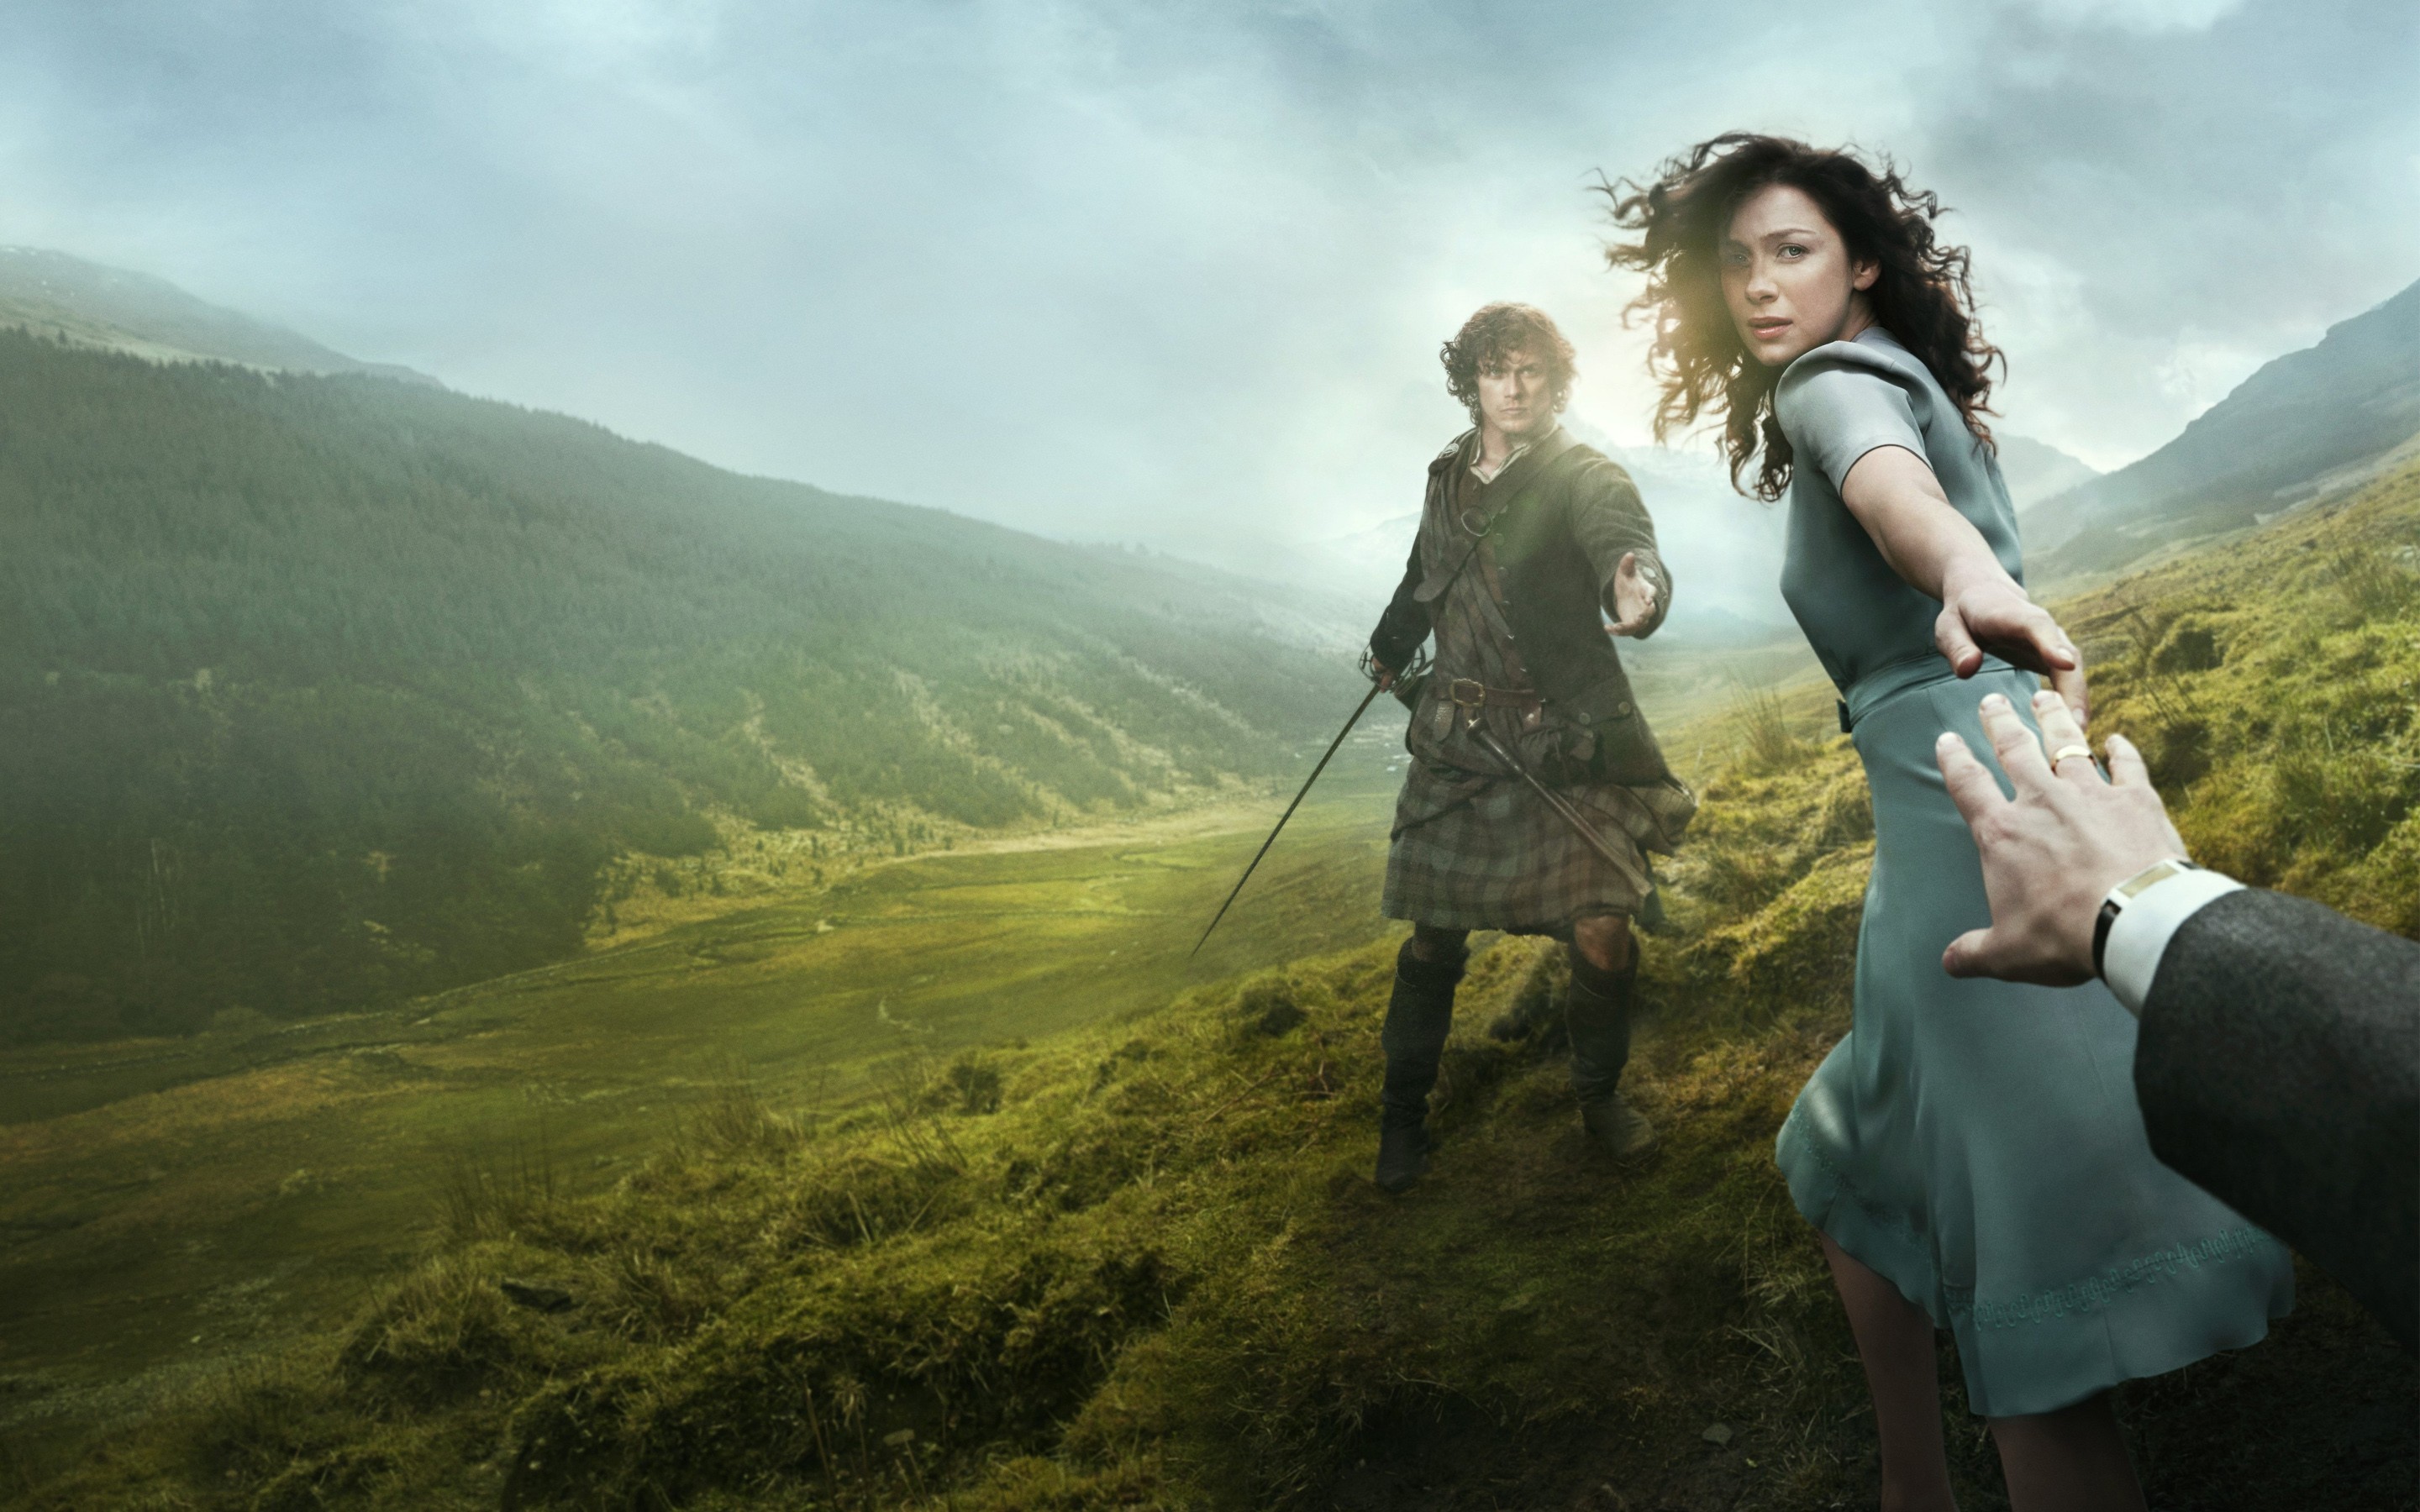 outlander wallpaper,people in nature,highland,mountainous landforms,hill,mountain